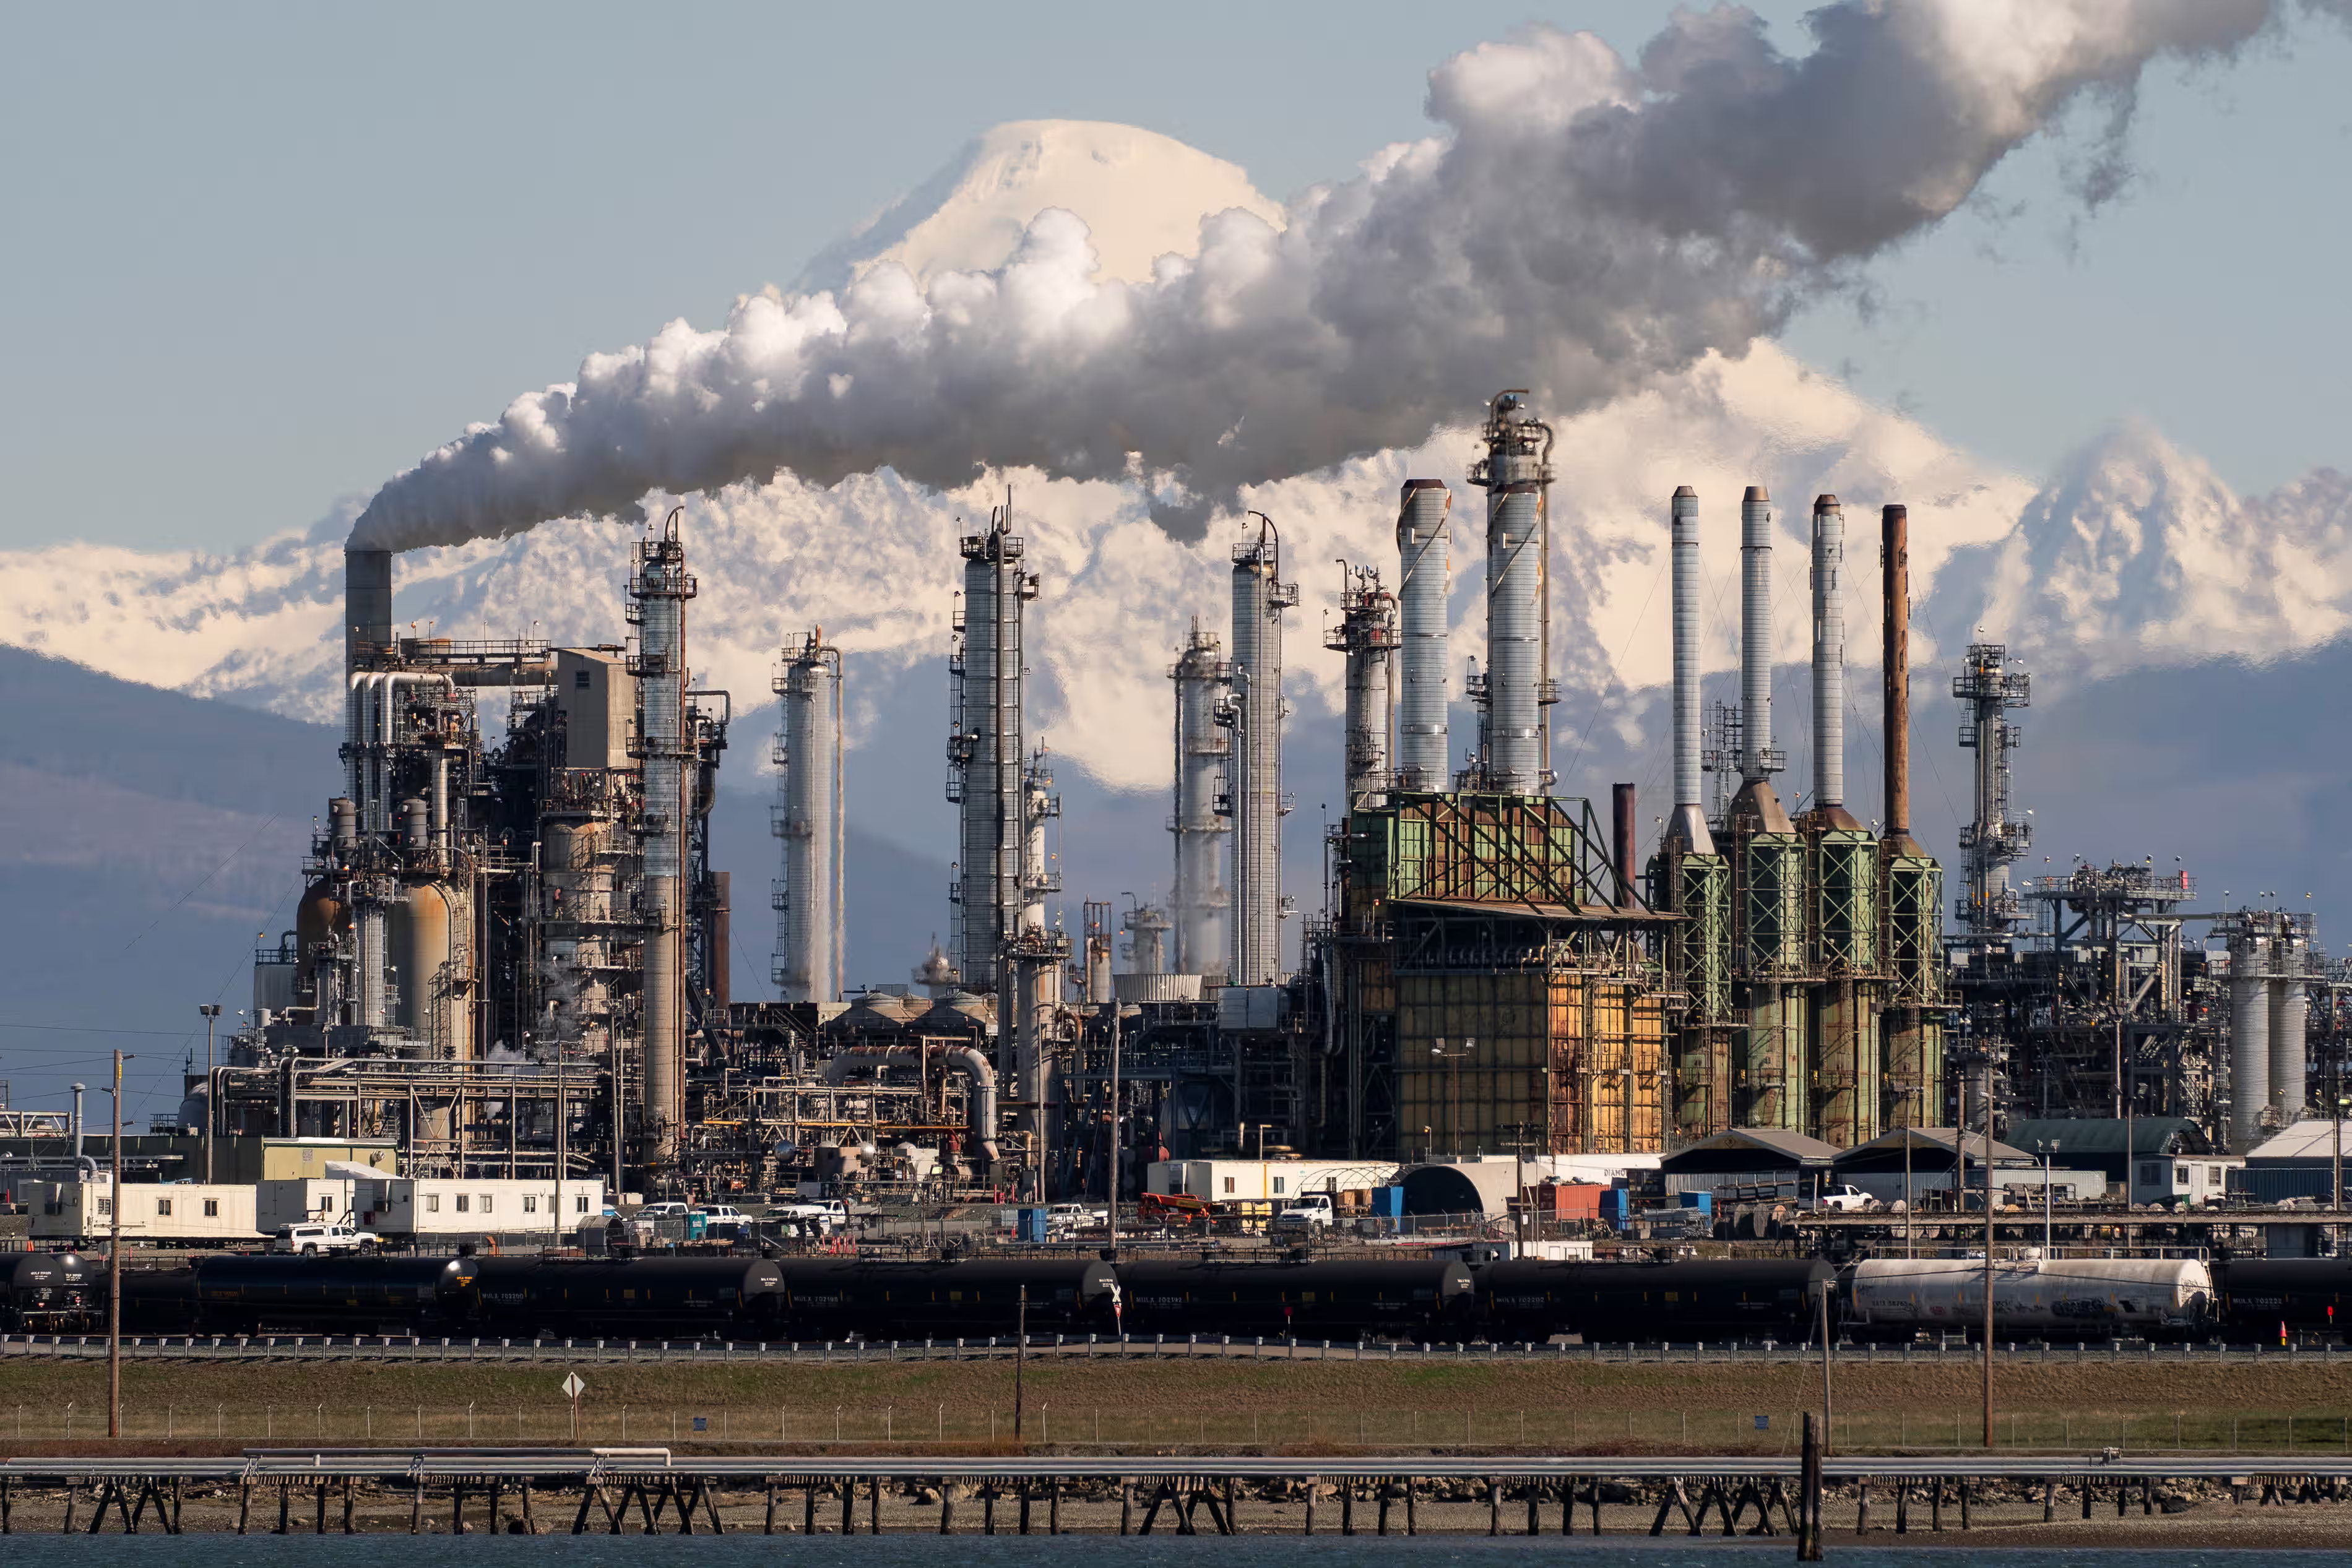 The Puget Sound Refinery on March Point near Anacortes, Washington, 9 March 2022. Photo: David Ryder / Reuters